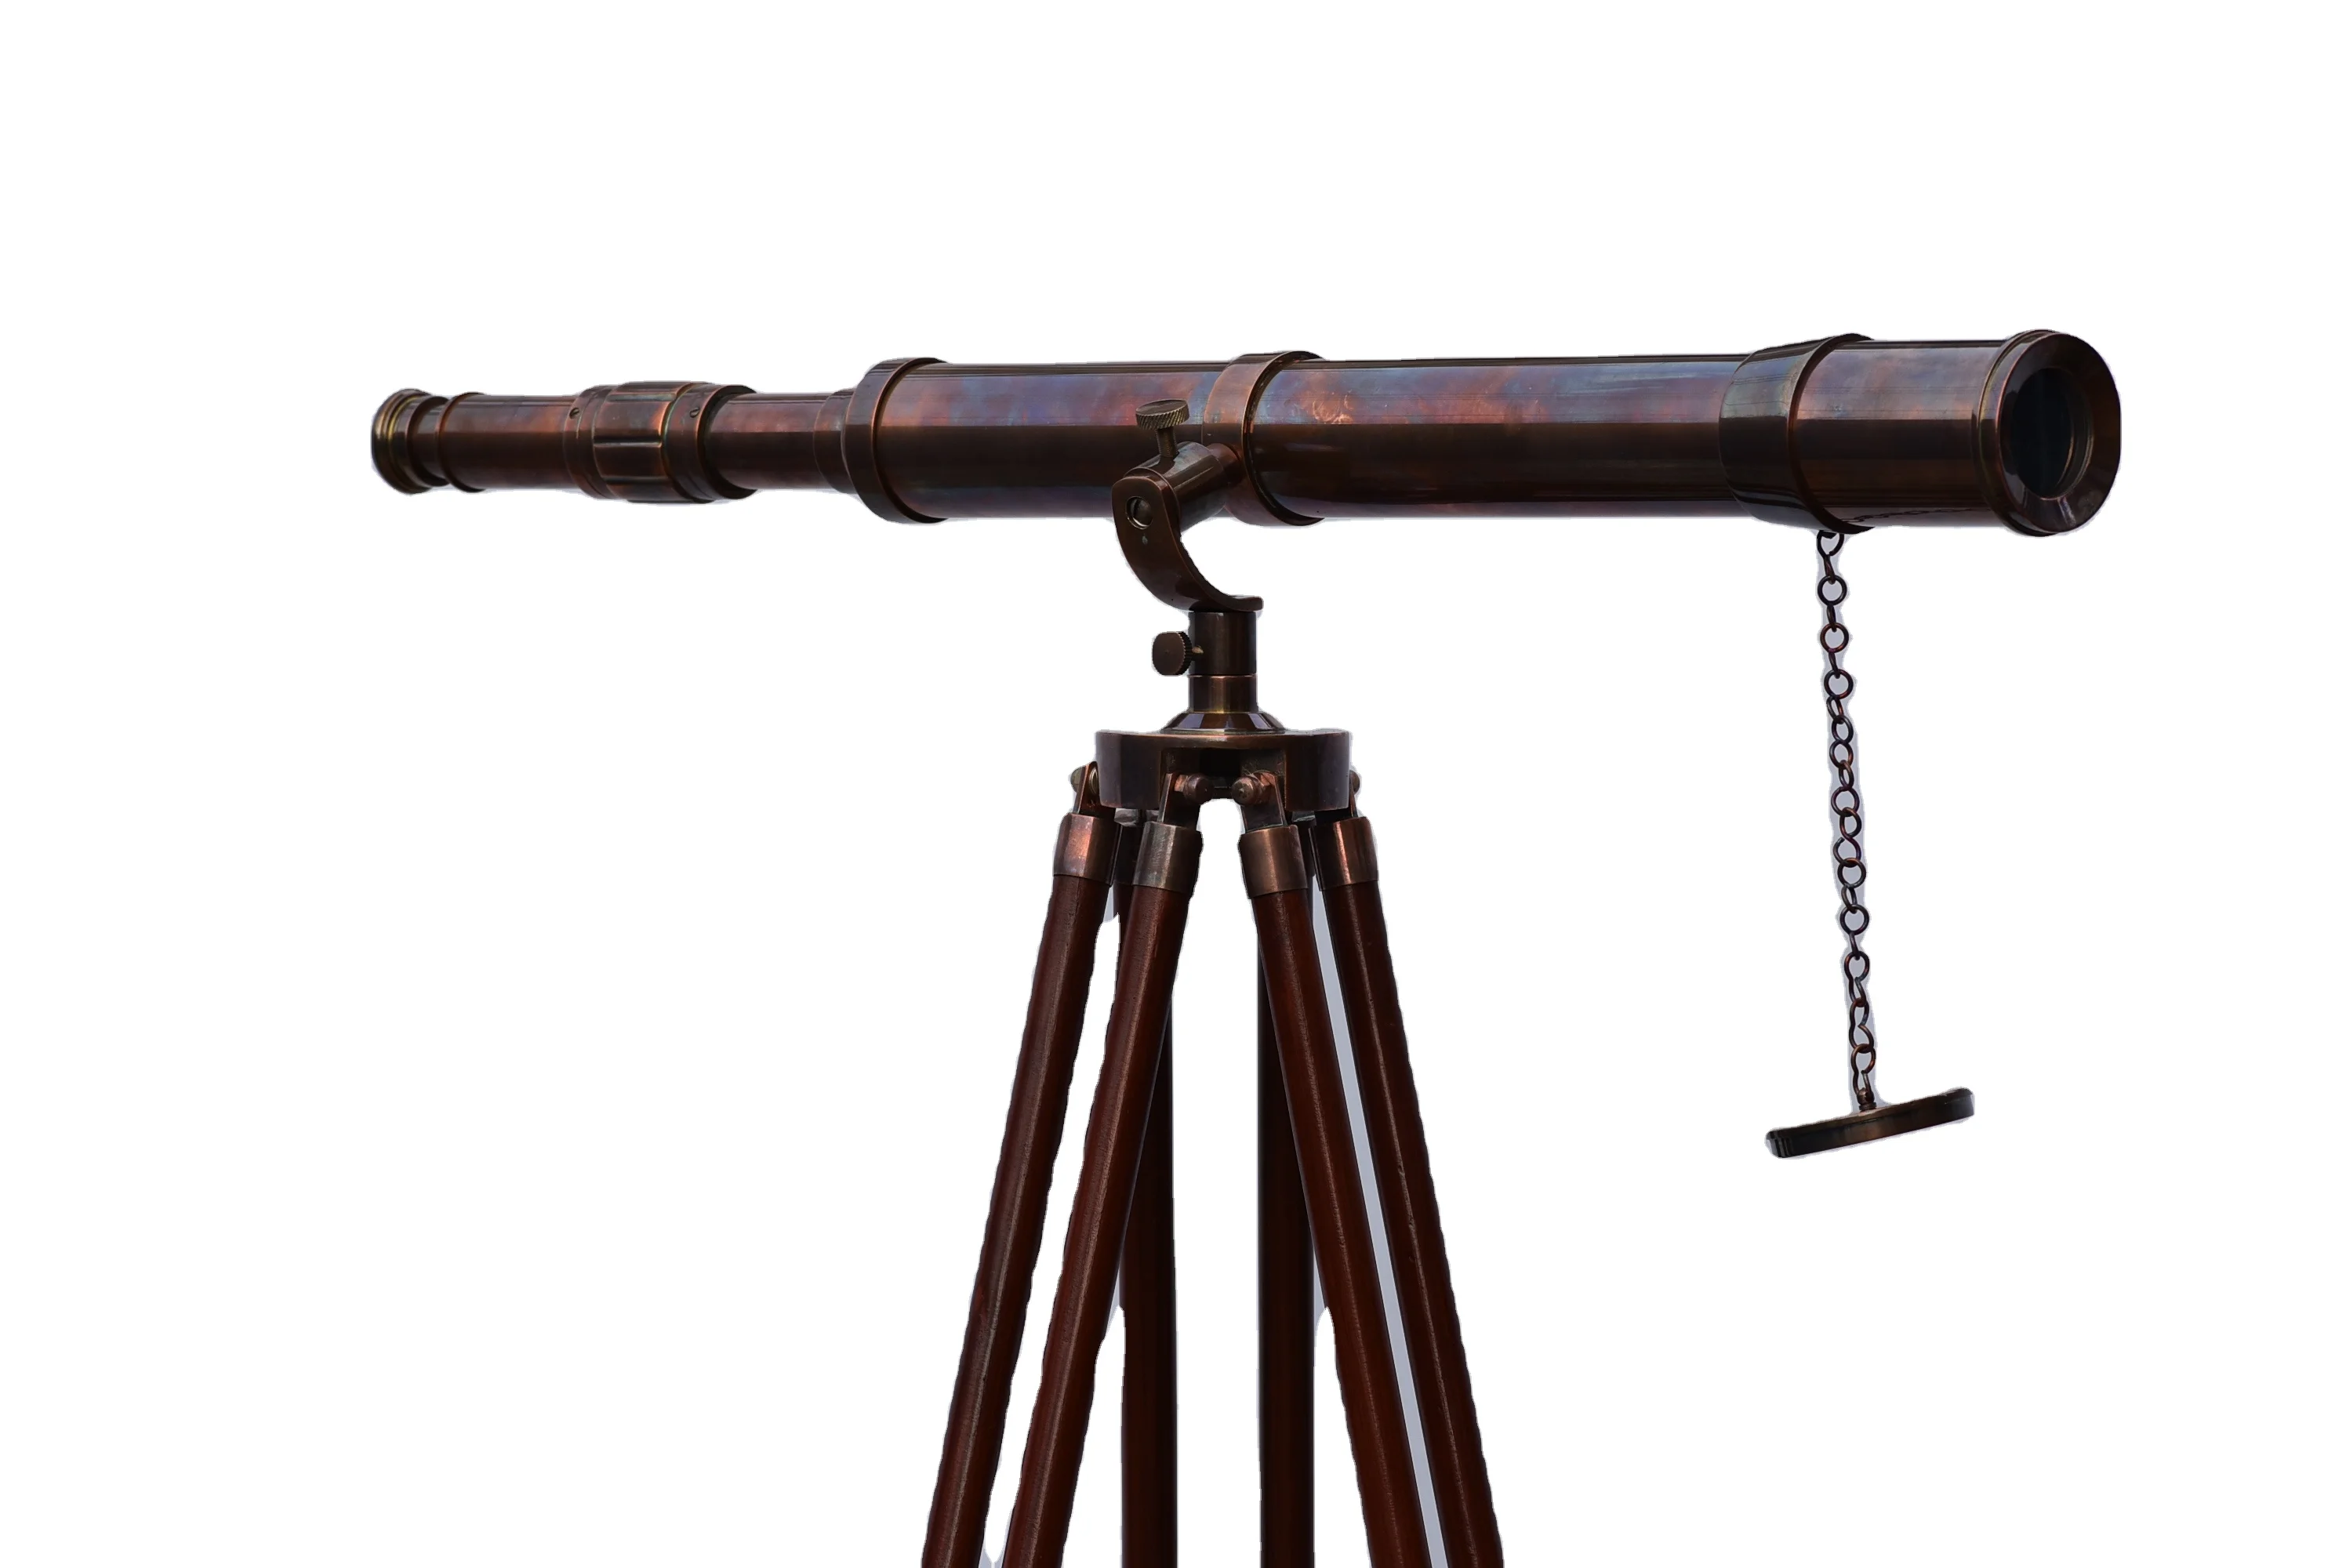 Full Size Brass Telescope On a Wooden Tripod Stand 39" Tube Length Nickel Finish 